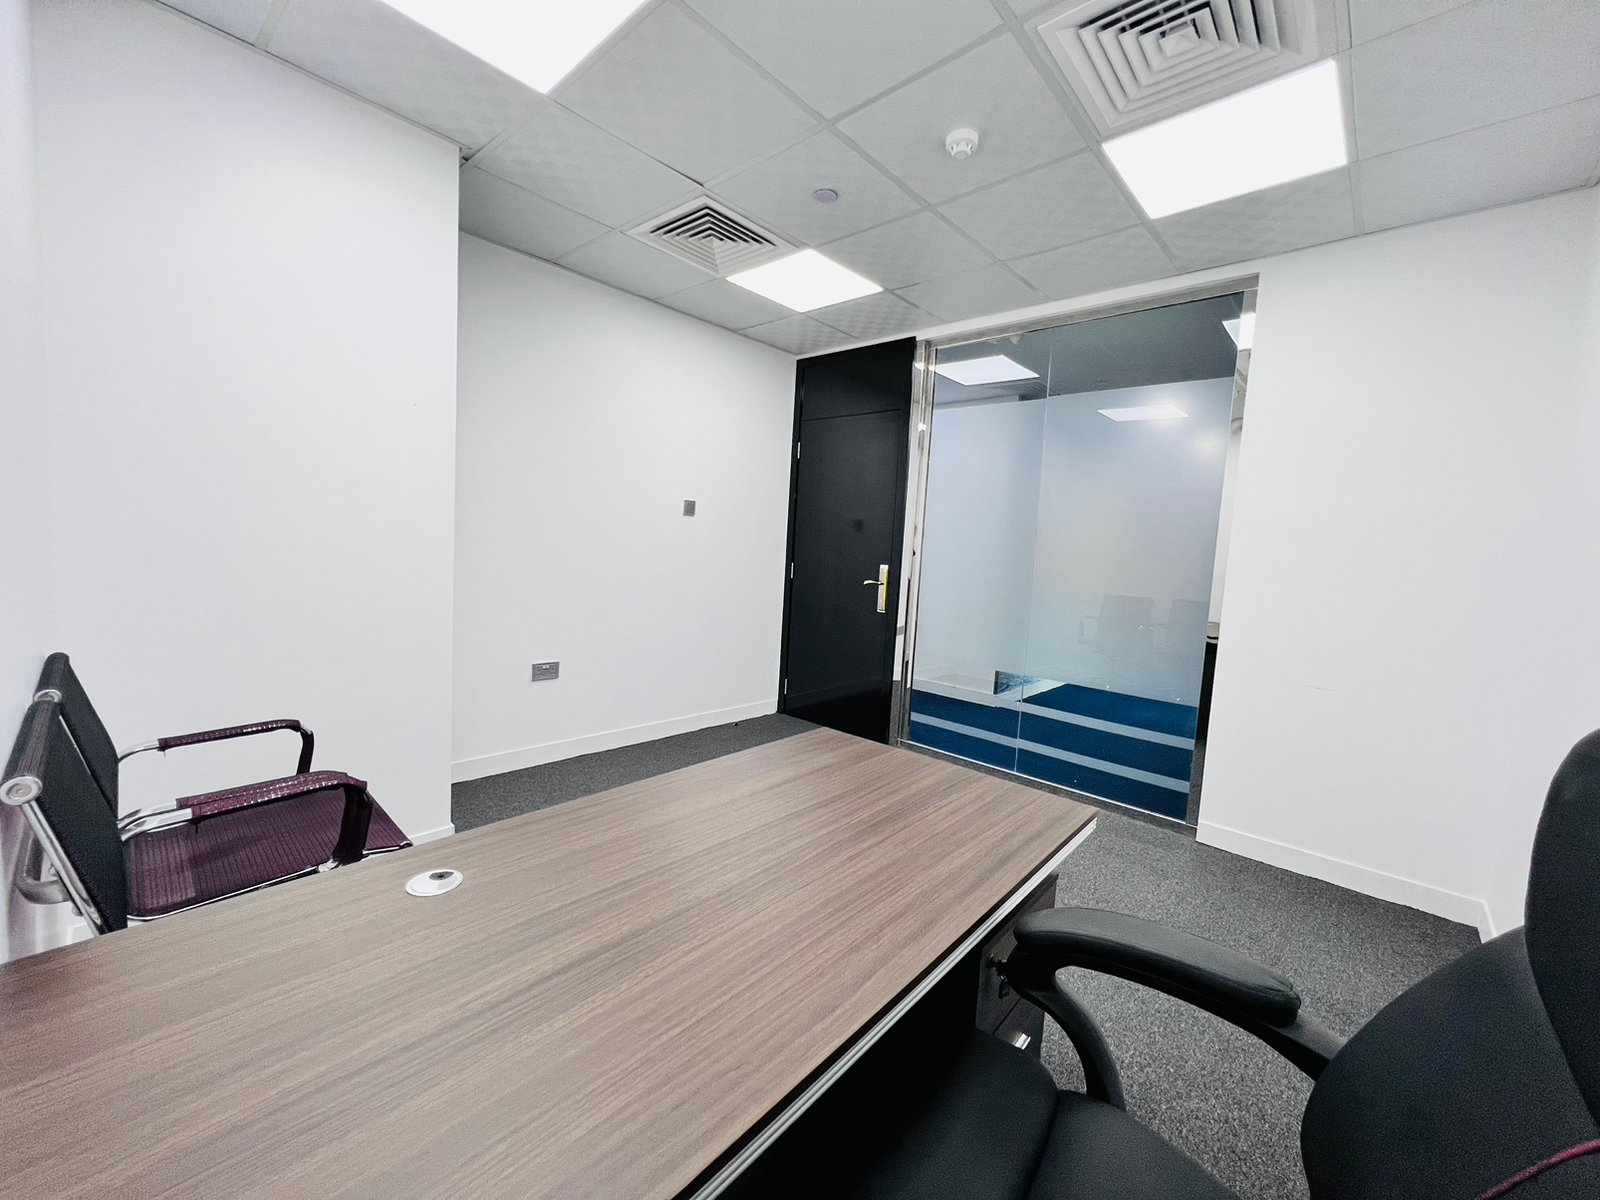 Executive Office Space Including Office Furniture